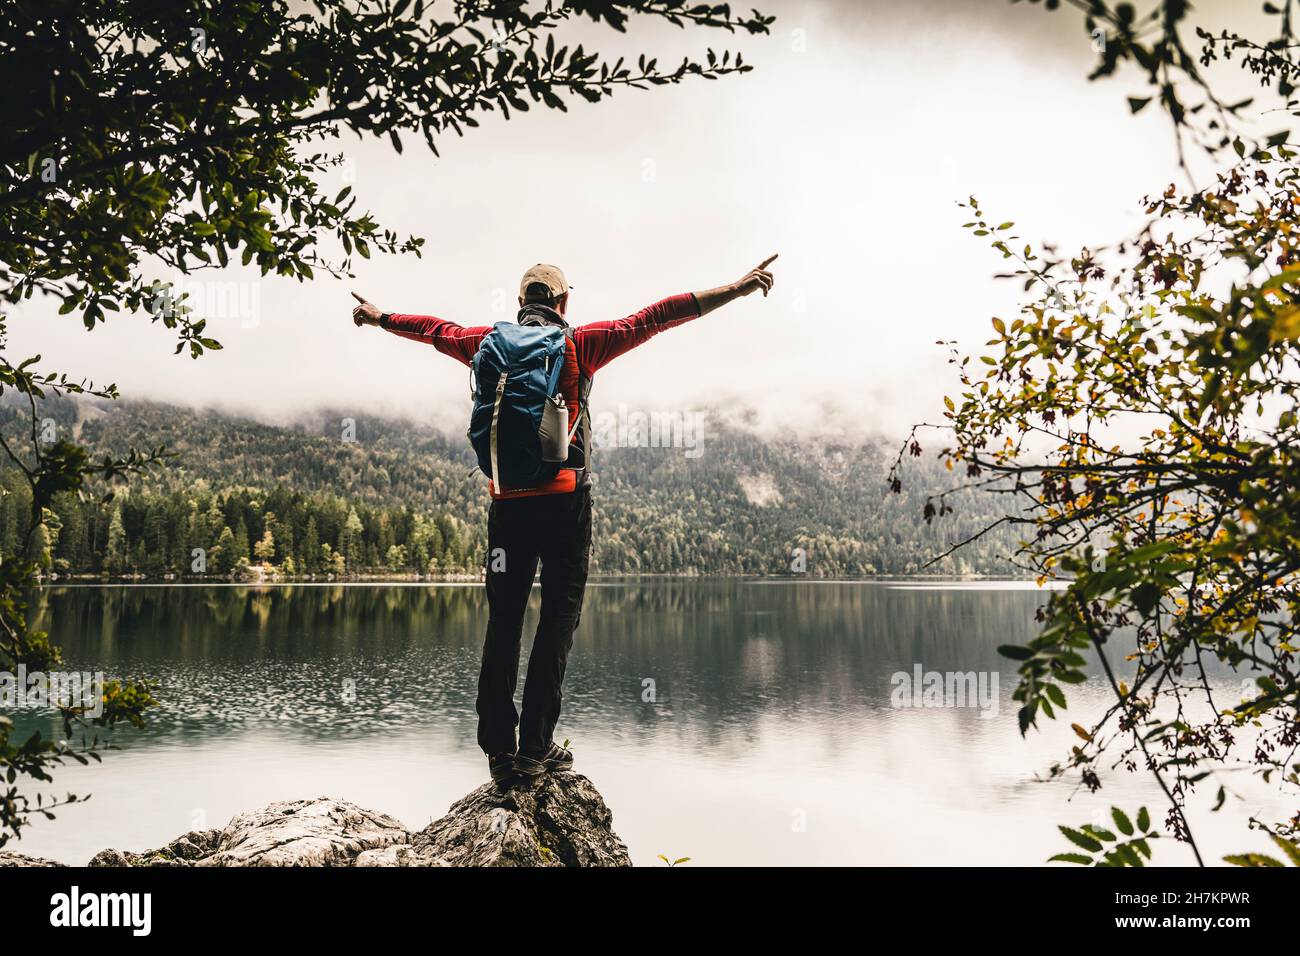 Male backpacker with arms outstretched standing on rock Stock Photo